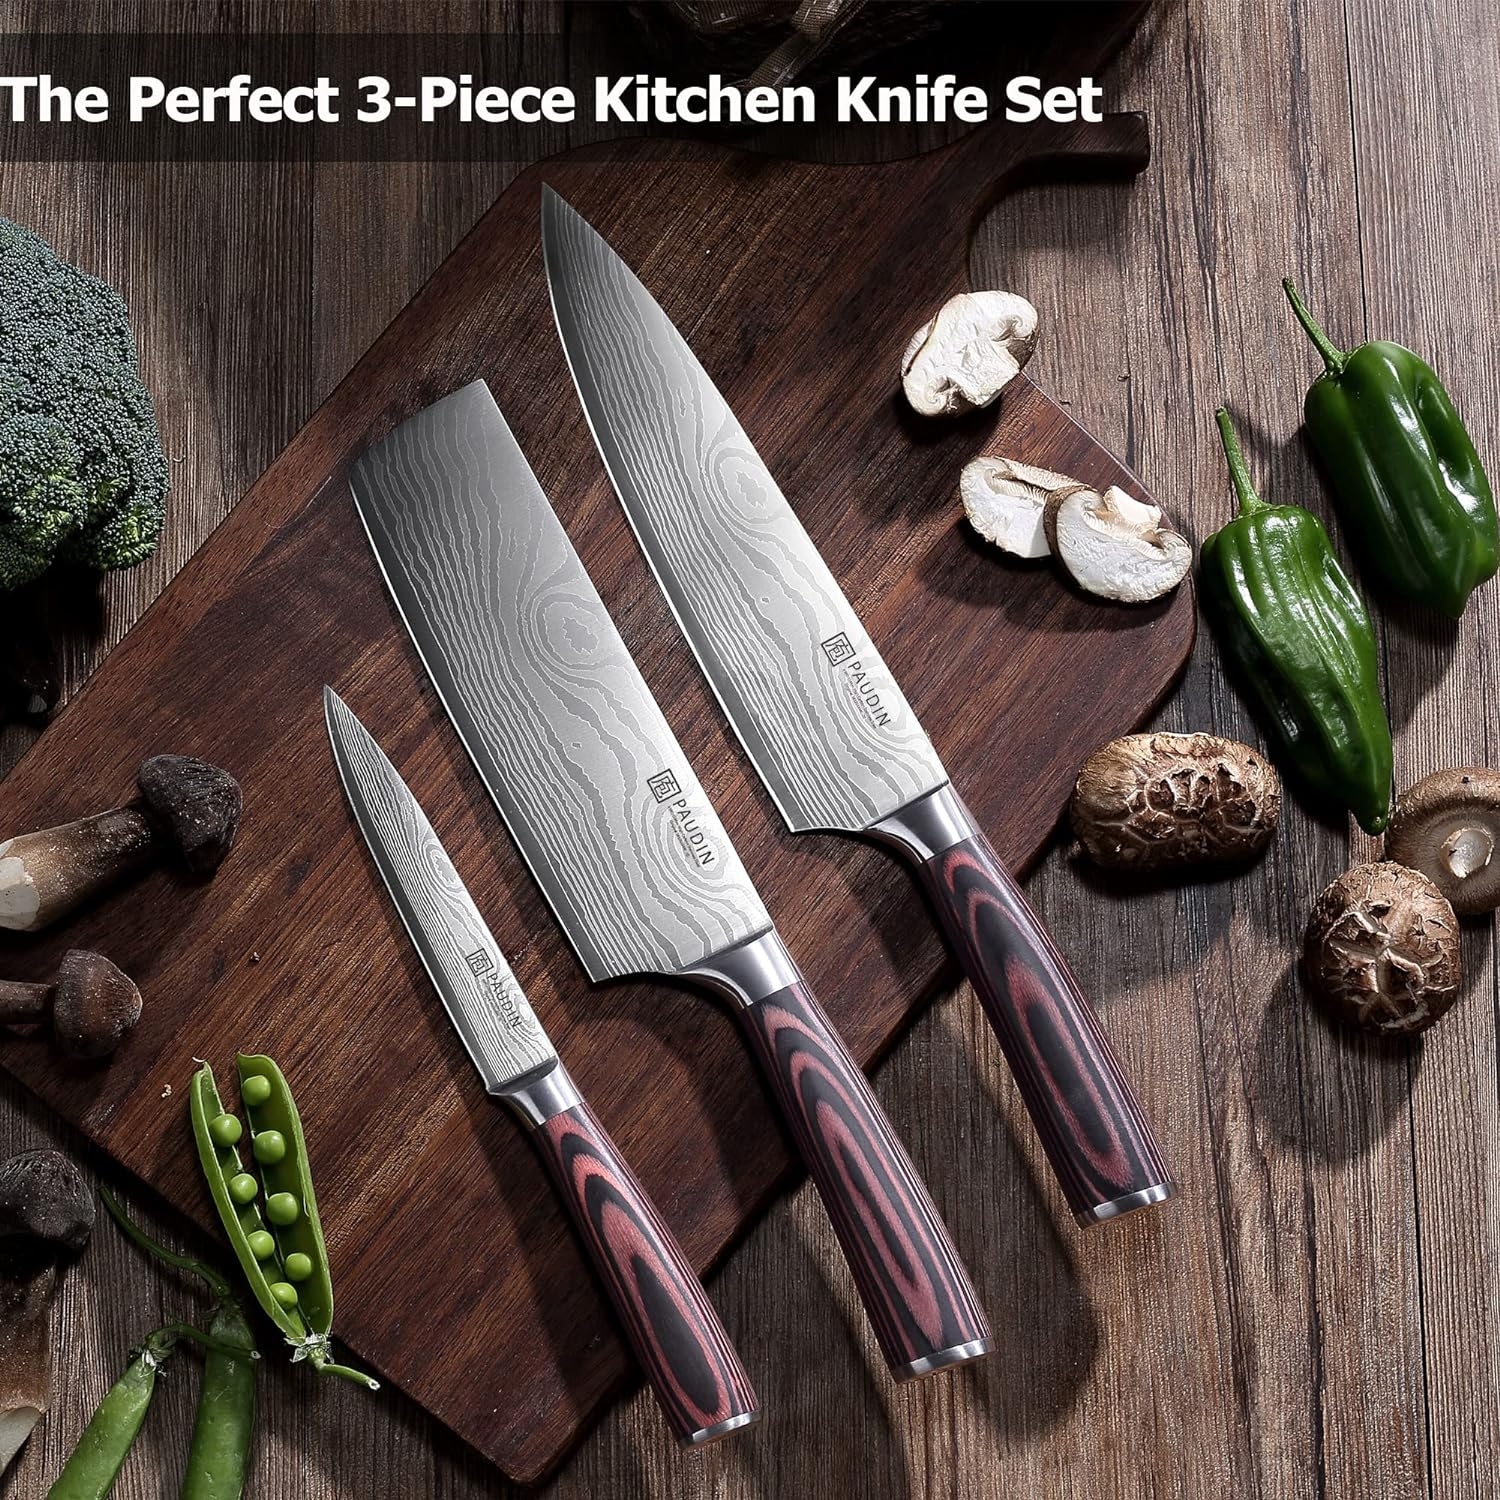 PAUDIN Kitchen Knife Set, 3 Piece High Carbon Stainless Steel Professional  Chef Knife Set with Ultra Sharp Blade & Wooden Handle (Kitchen Knife Set 3